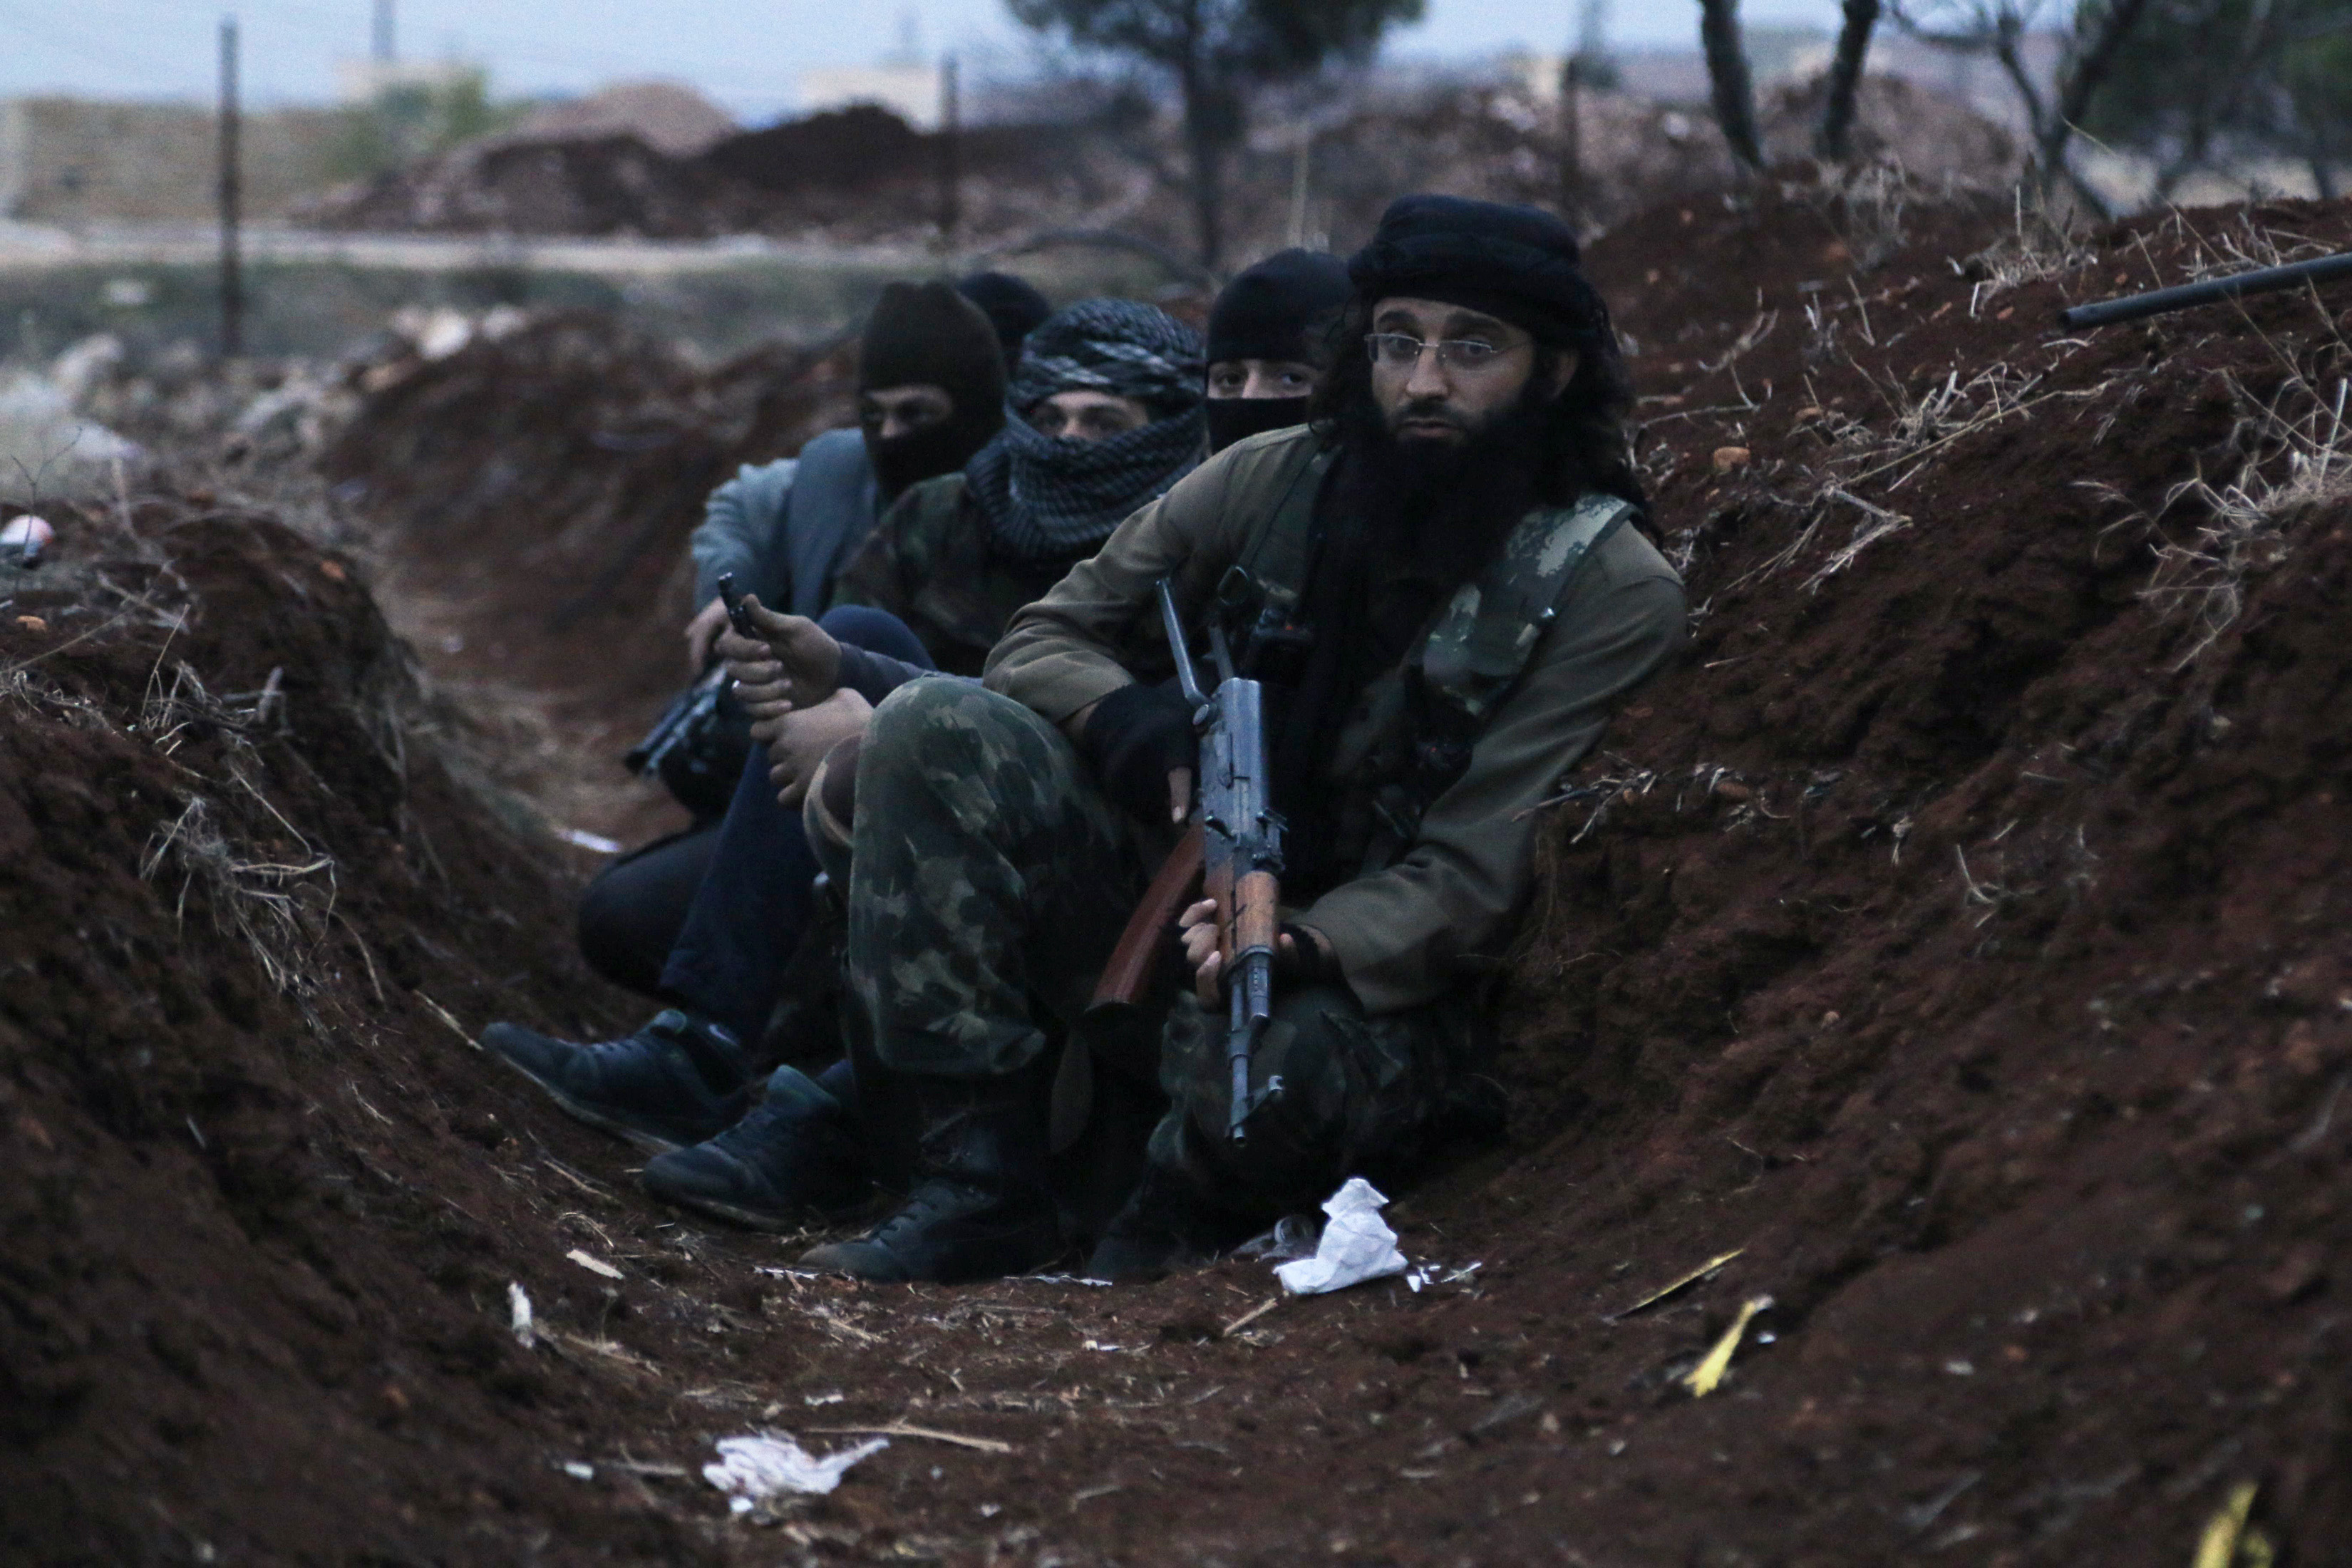 Members of al Qaeda's Nusra Front carry their weapons as they sit in a trench near al-Zahra village, north of Aleppo city, November 25, 2014. (REUTERS/Hosam Katan)